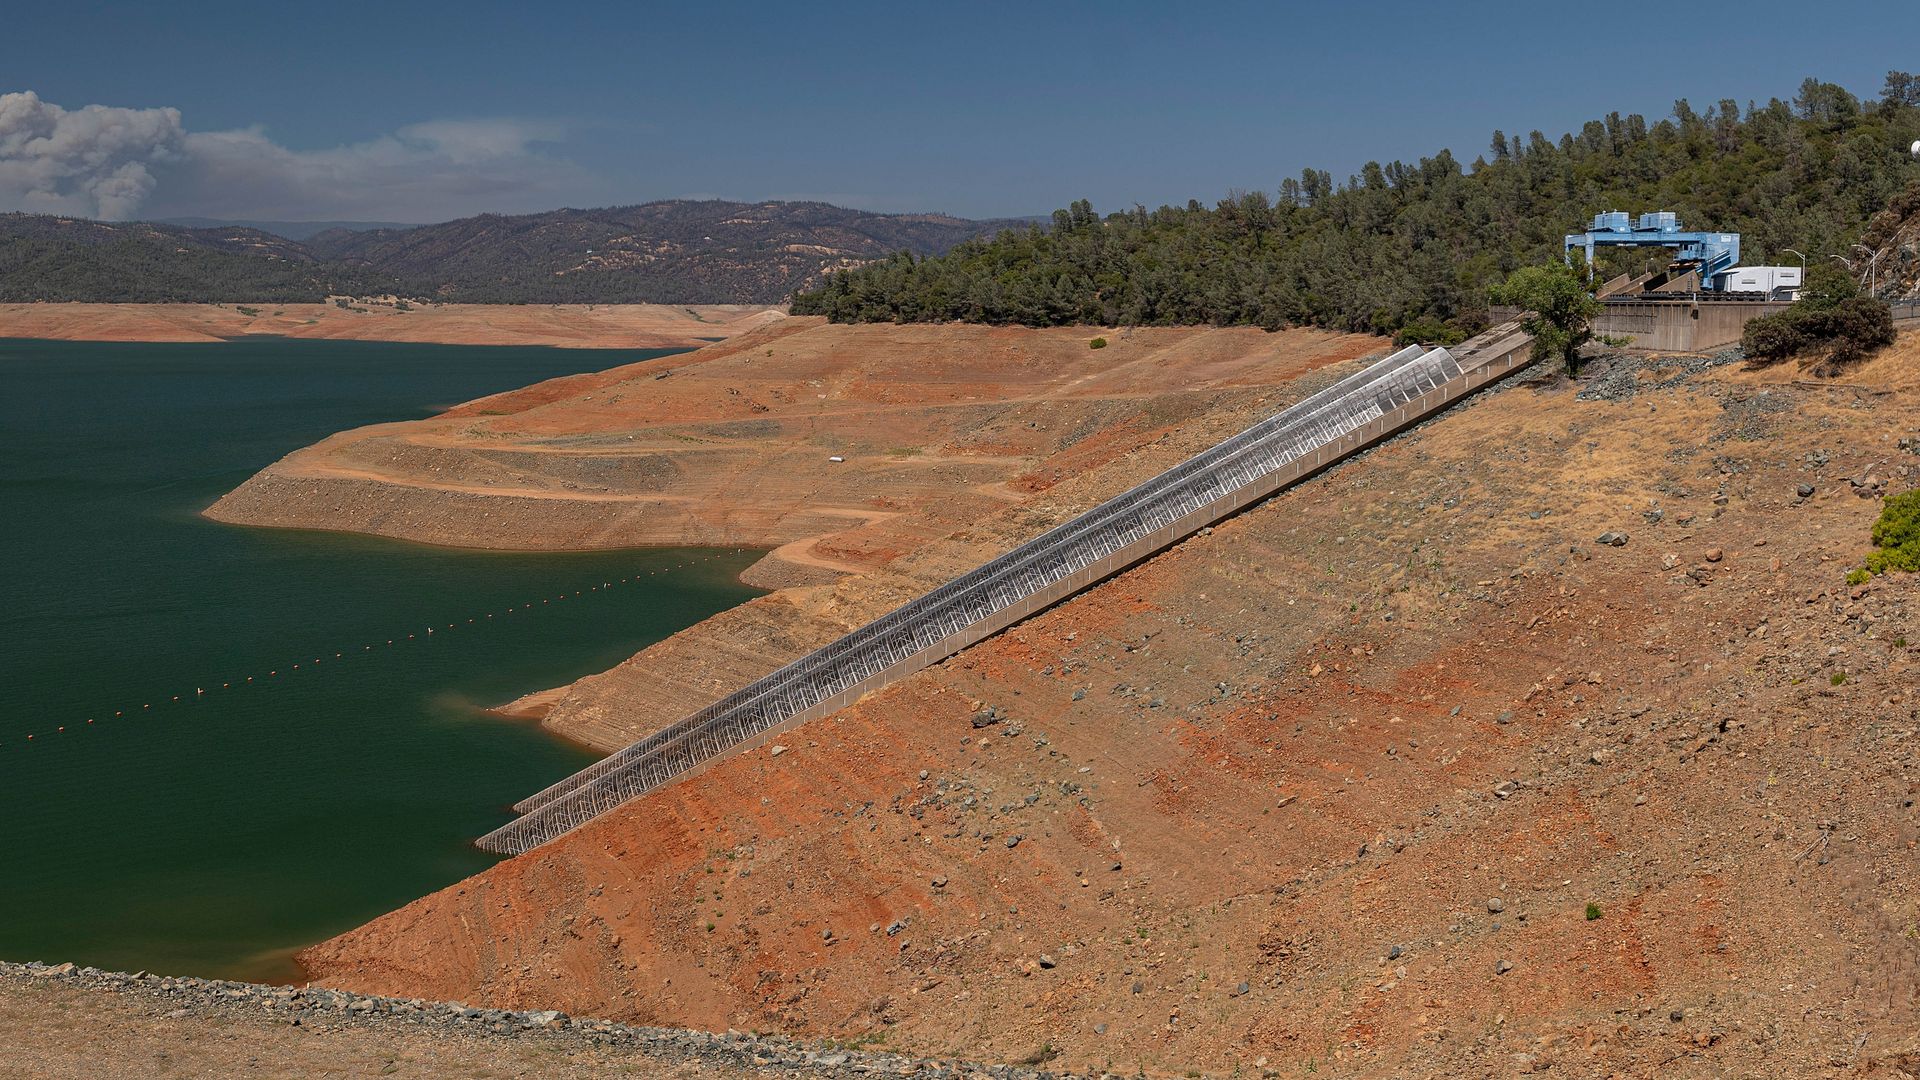 Penstock intakes for the Hyatt Powerplant at Lake Oroville during a drought in Oroville, California, U.S., on Thursday, July 15, 2021.